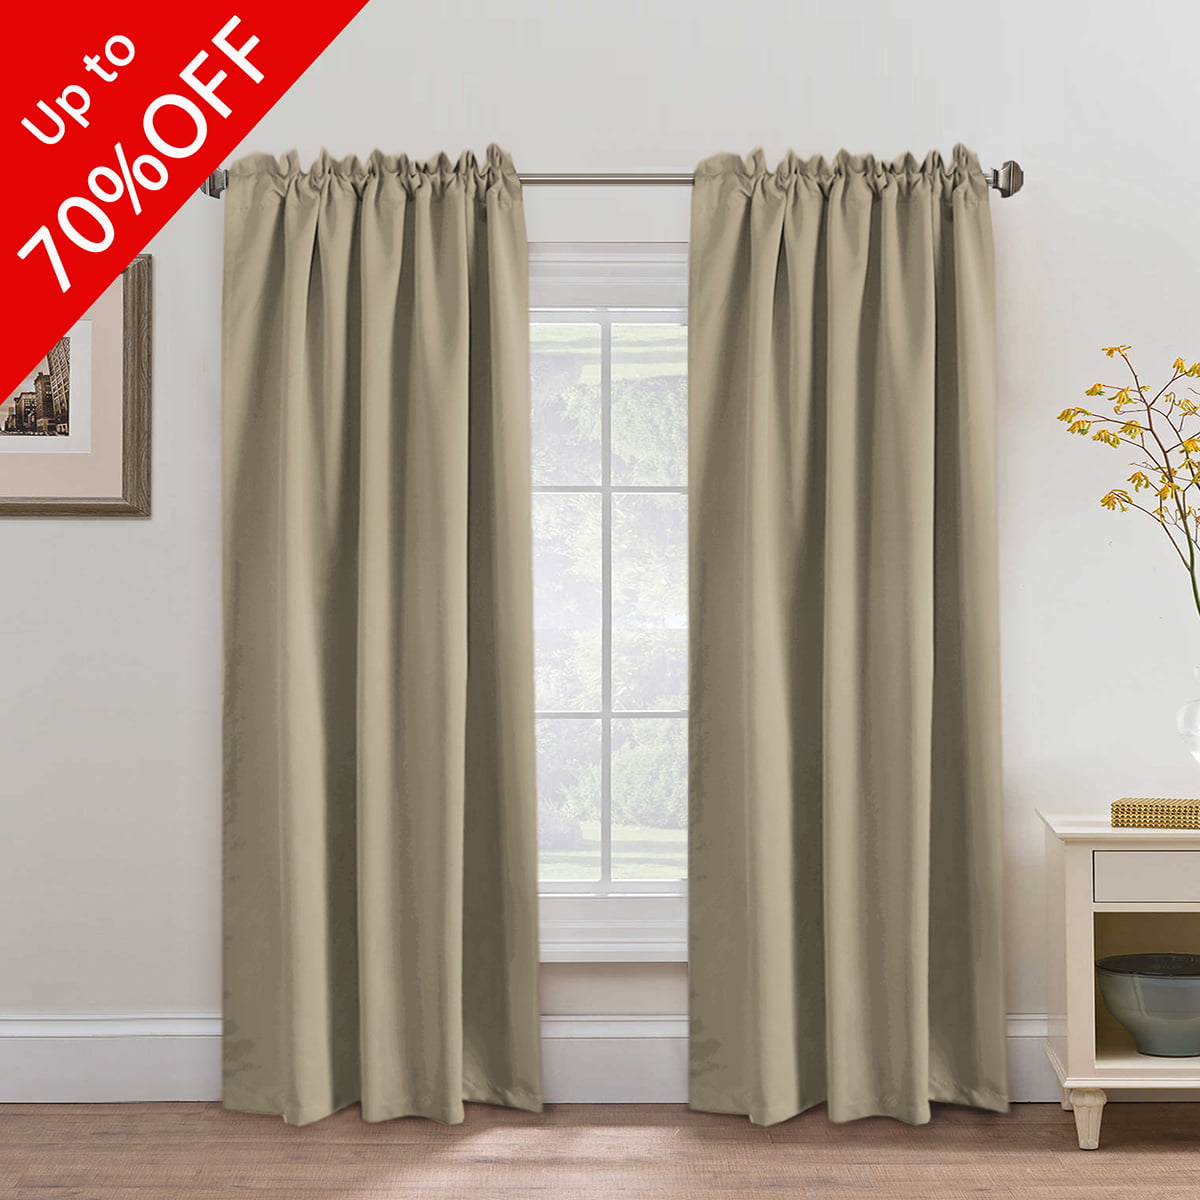 2 Panels W46 x L54 inch Darkening Curtain for Living Room Thermal Insulated Rod Pocket Window Curtains Brown FLOWEROOM Blackout Curtains for Bedroom 117cmx137cm 